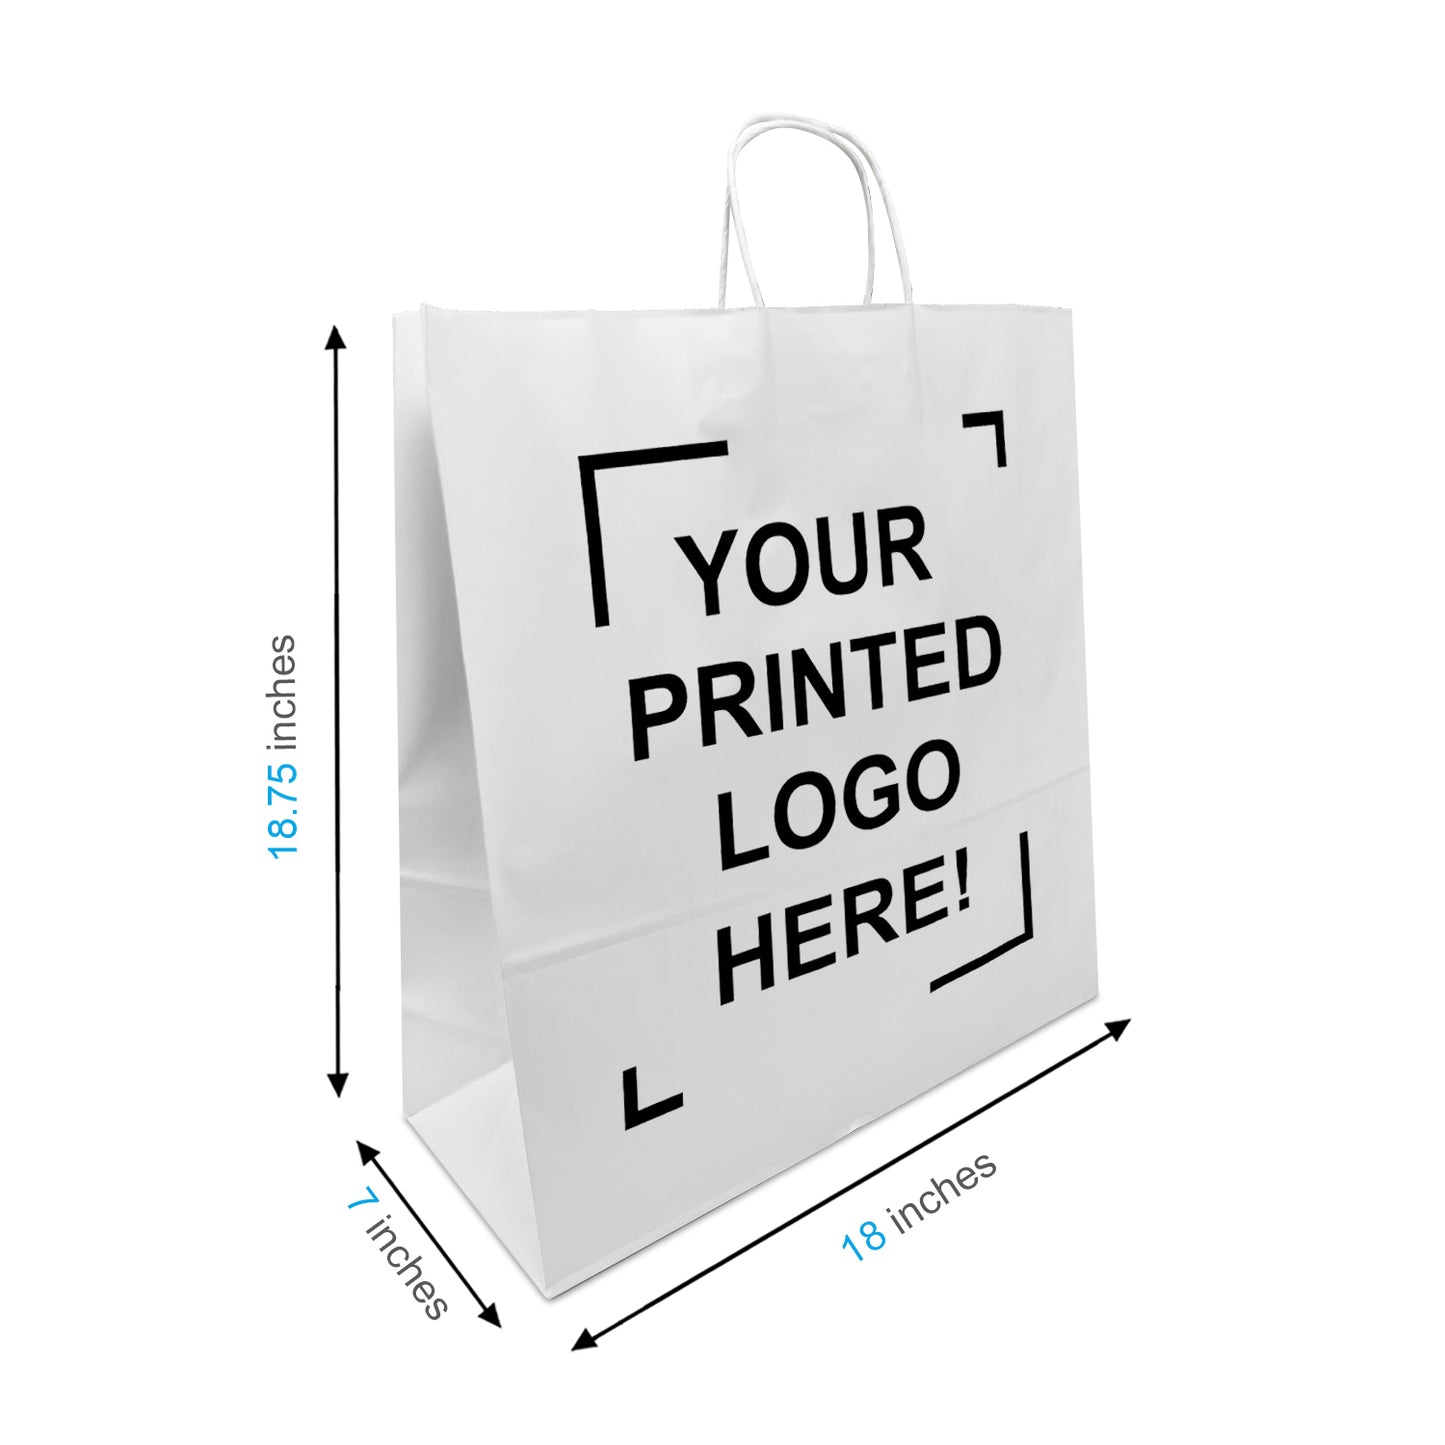 200 Pcs, Jumbo, 18x7x19.75 inches, White Kraft Paper Bags, with Twisted Handle, Full Color Custom Print